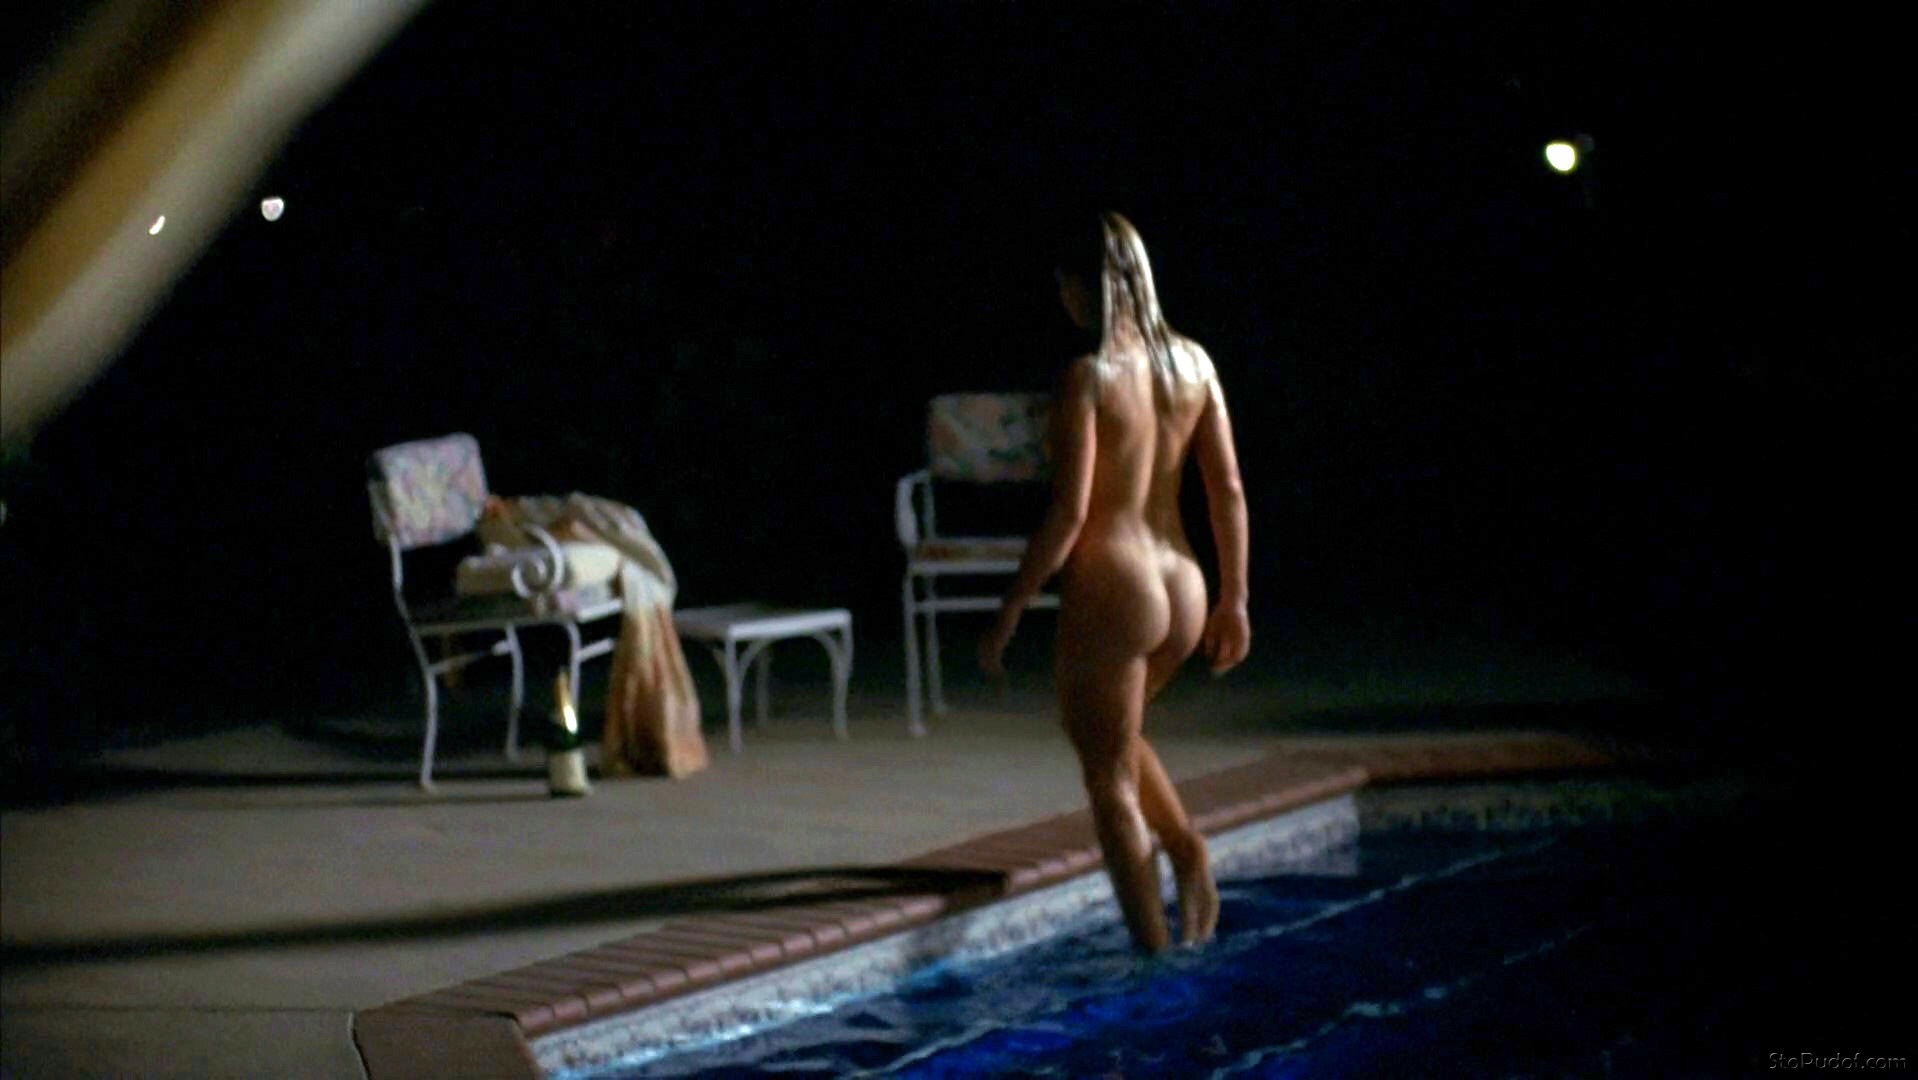 see naked pictures of Jaime Pressly - UkPhotoSafari